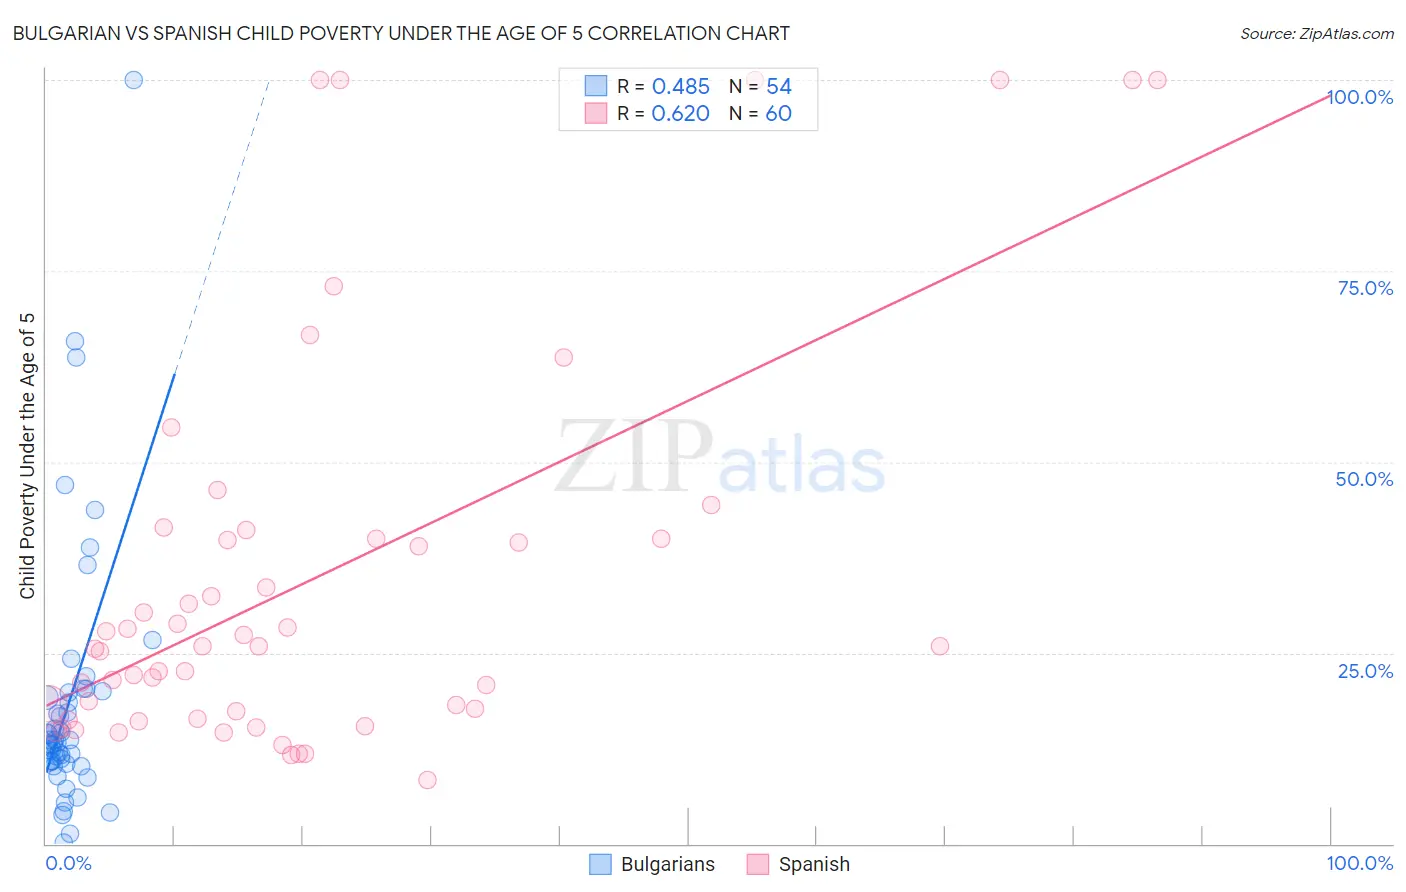 Bulgarian vs Spanish Child Poverty Under the Age of 5